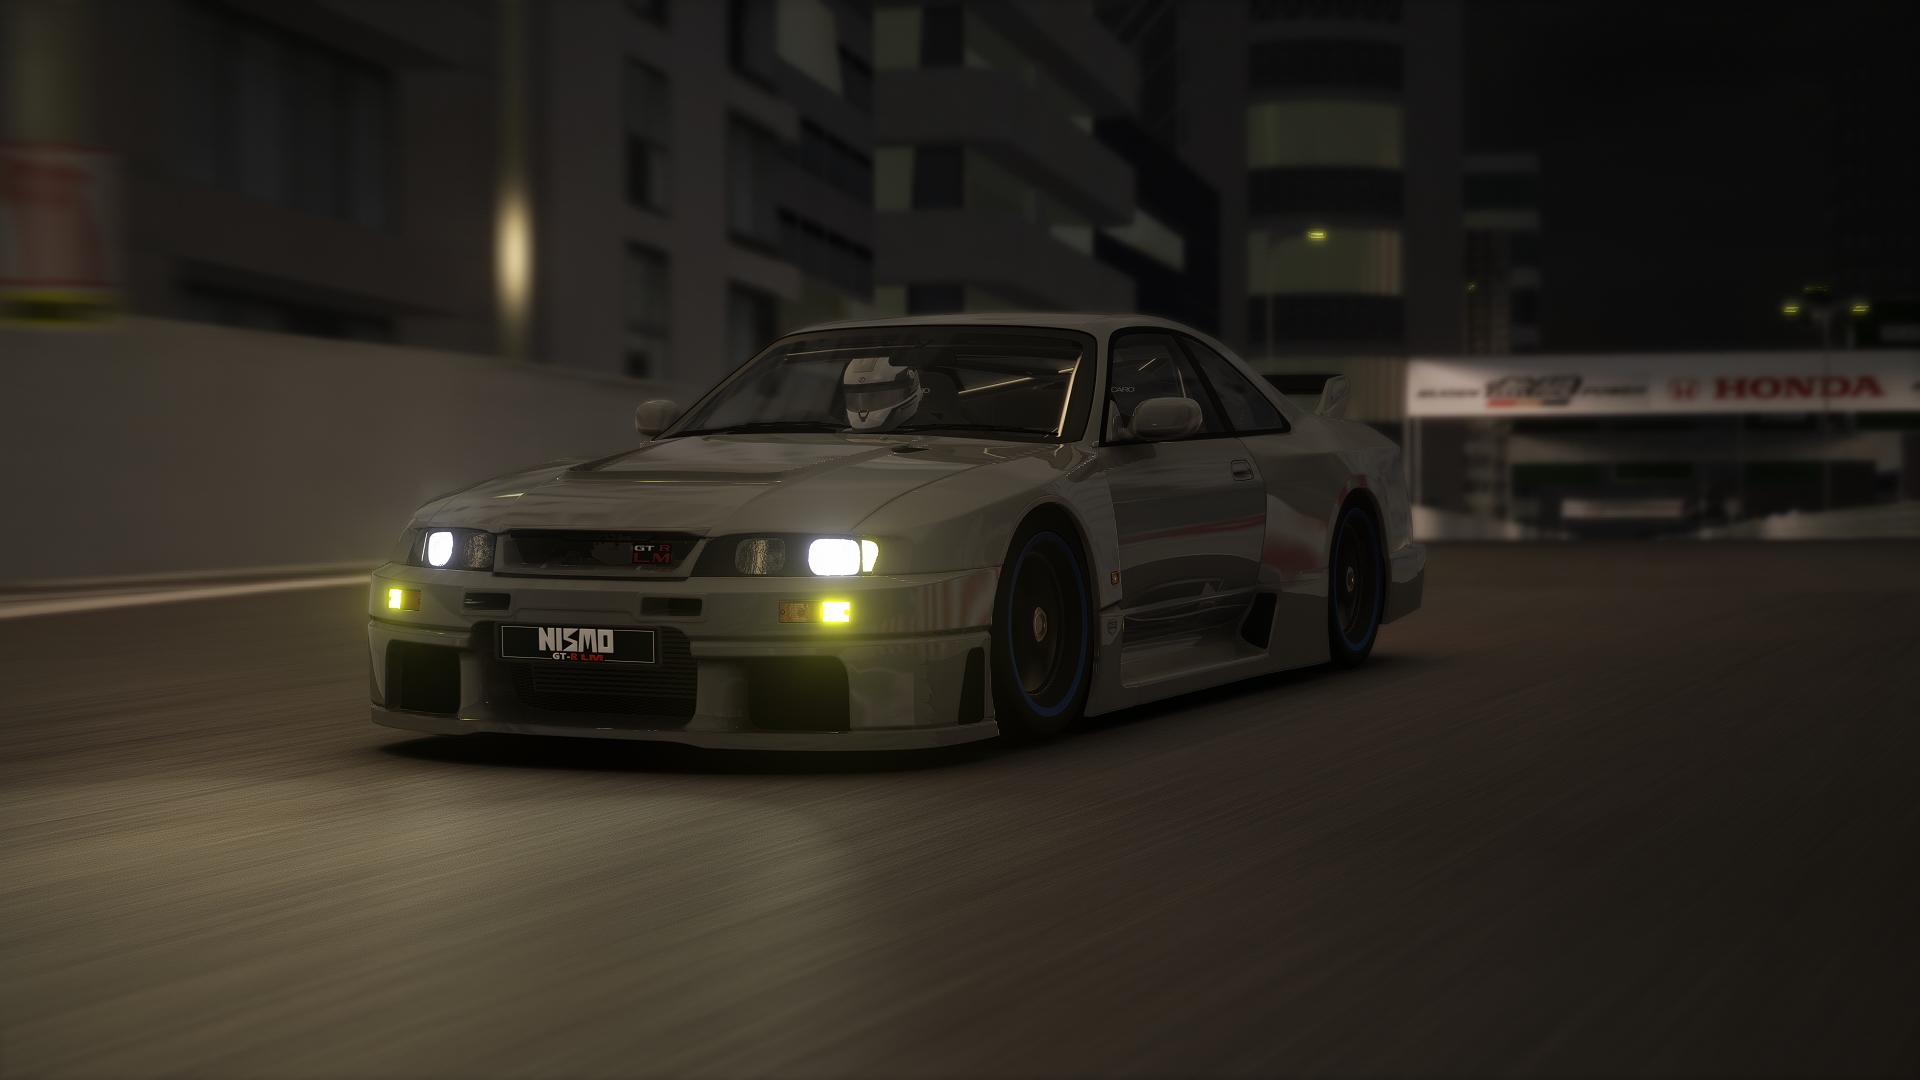 Screenshot_nissan_r33_lm_special_stage_route_5_30-5-121-3-1-18.jpg